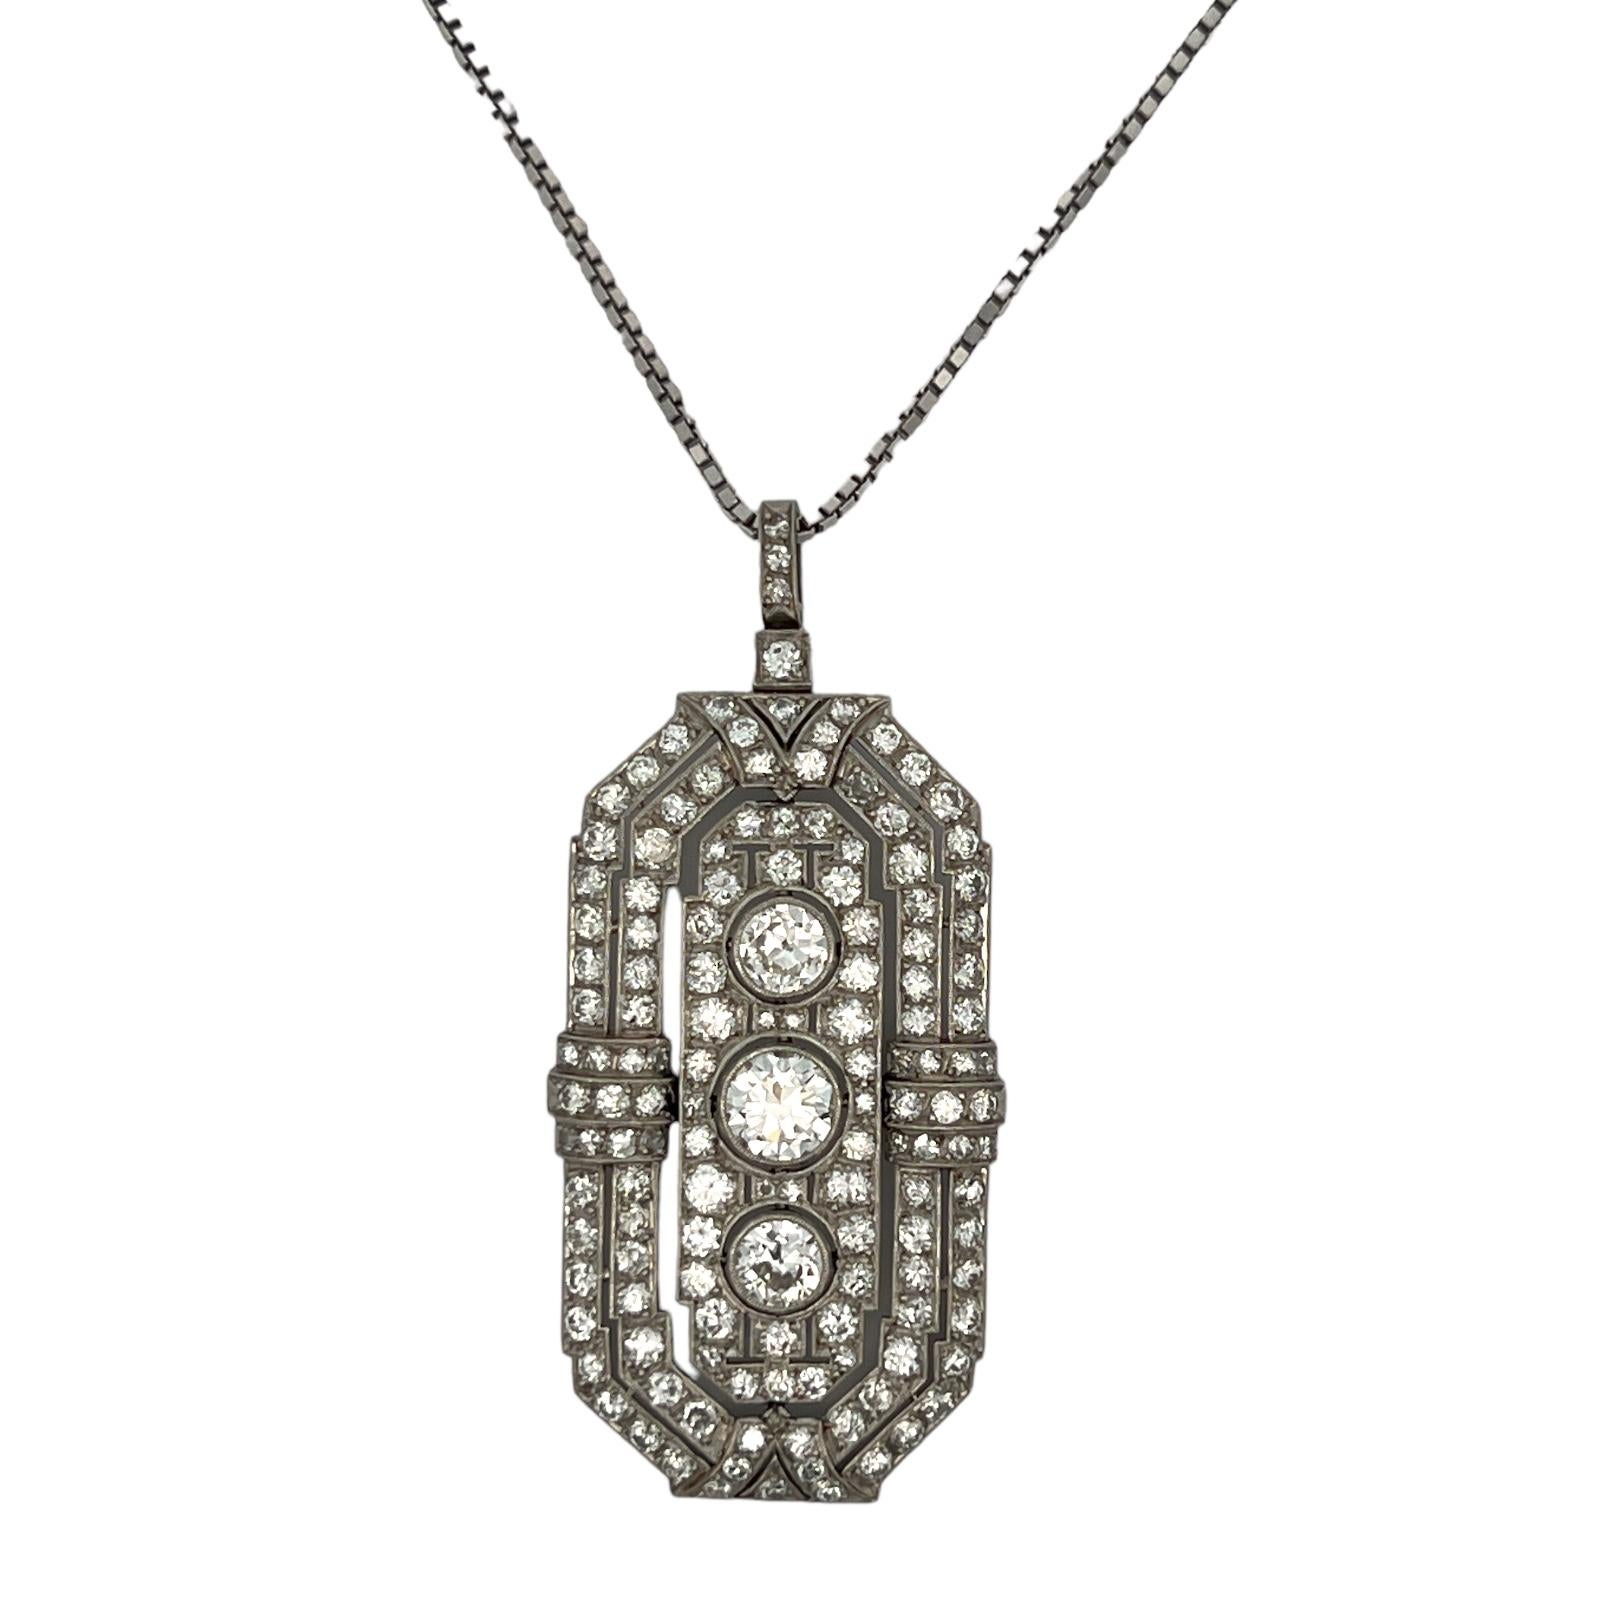 Original Art Deco diamond pendant handcrafted in platinum. The statement pendant features a center Old European cut diamond weighing approximately 1.22 carats. Two Old European diamonds weigh 1.16 CTW, and approximately 3.75 CTW in side diamonds